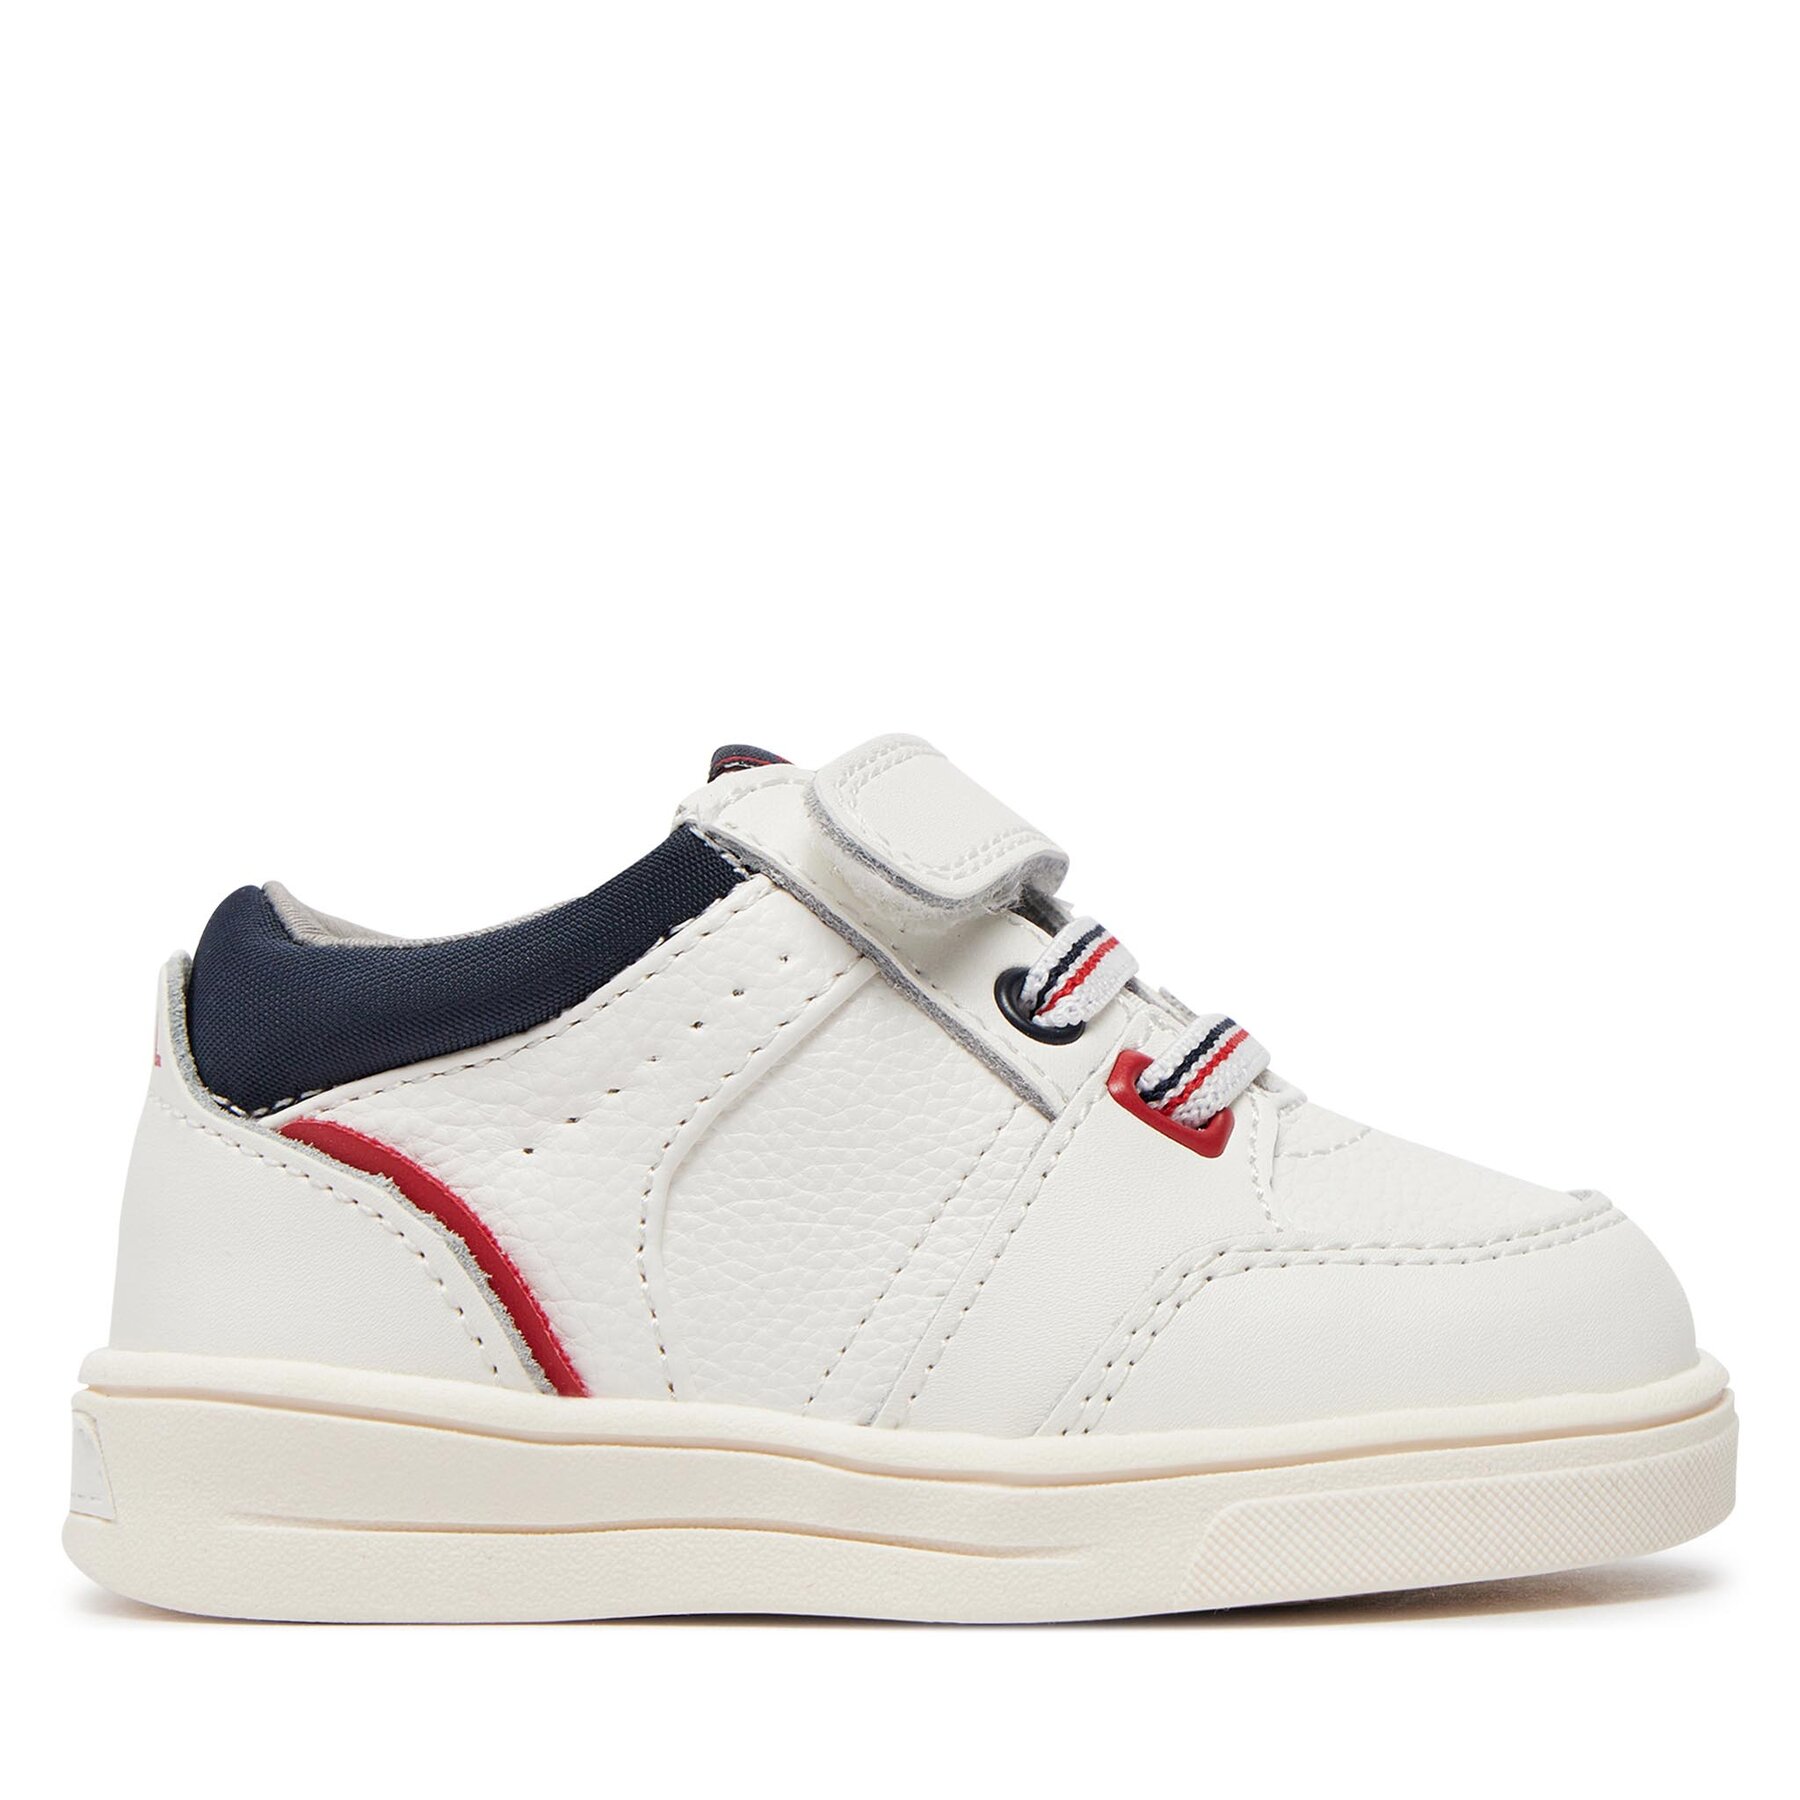 Sneakers Mayoral 41569 White Red 18 von Mayoral